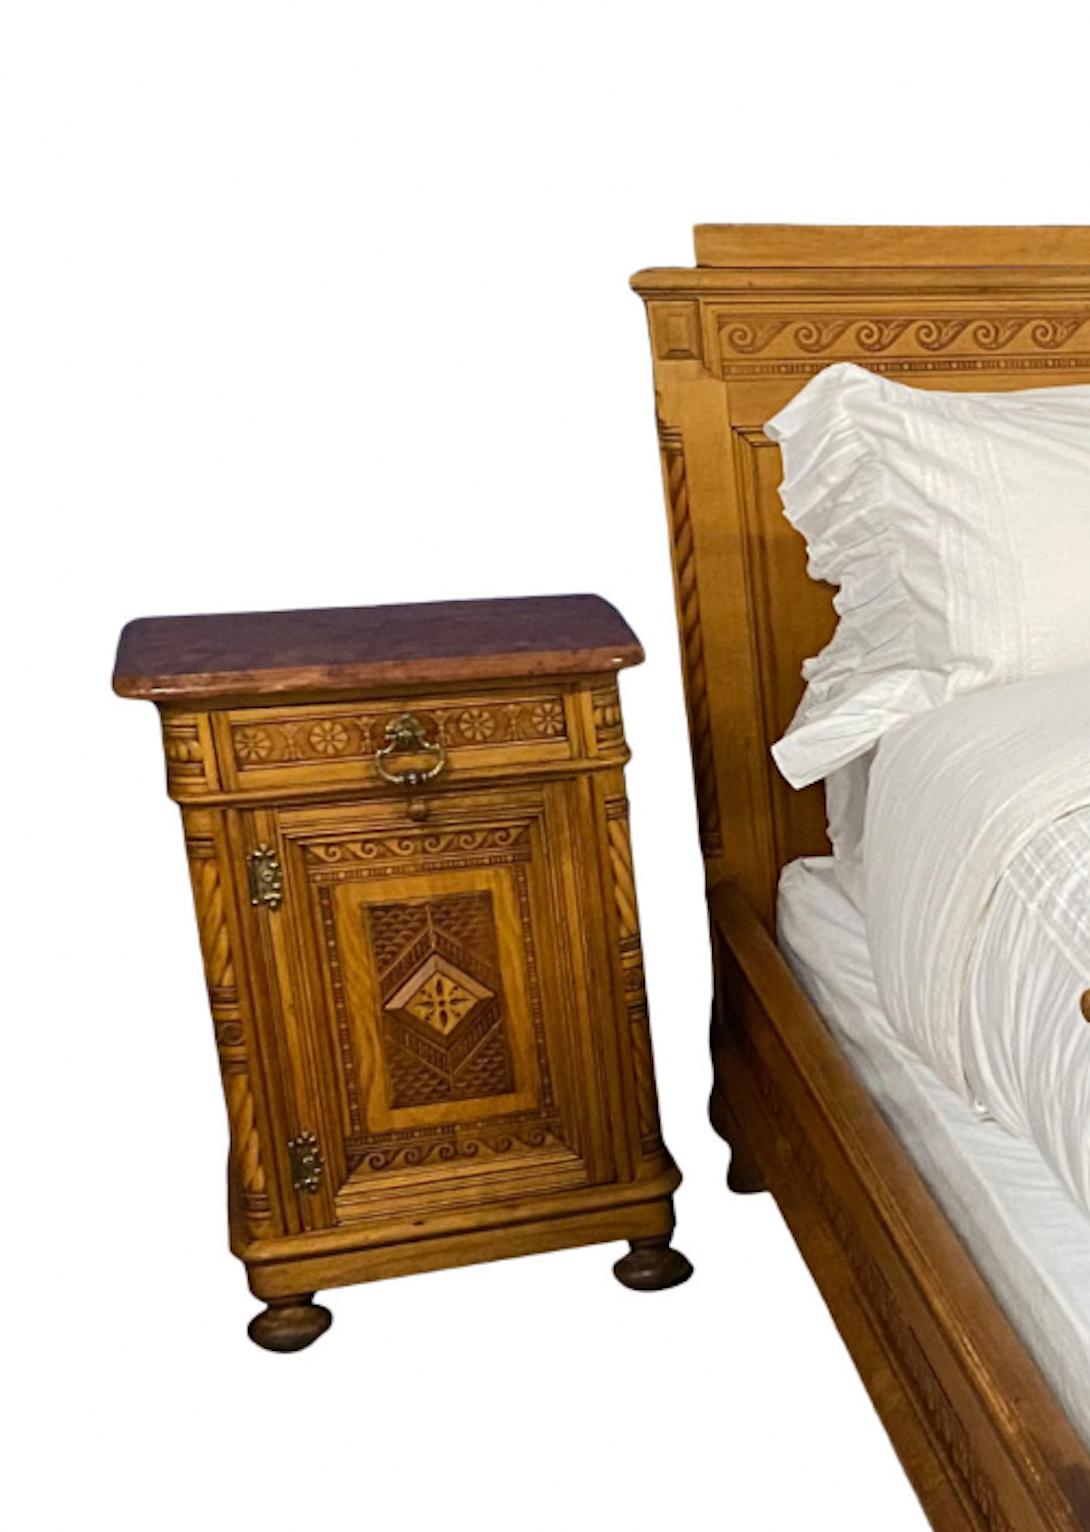 A striking and elaborately carded pair of vintage Austrian bed may just suit a snowy mountain retreat. Now reconfigured for a custom king mattress, these beds can pair with matching side tables and an amour which all belonged to a complete suite of